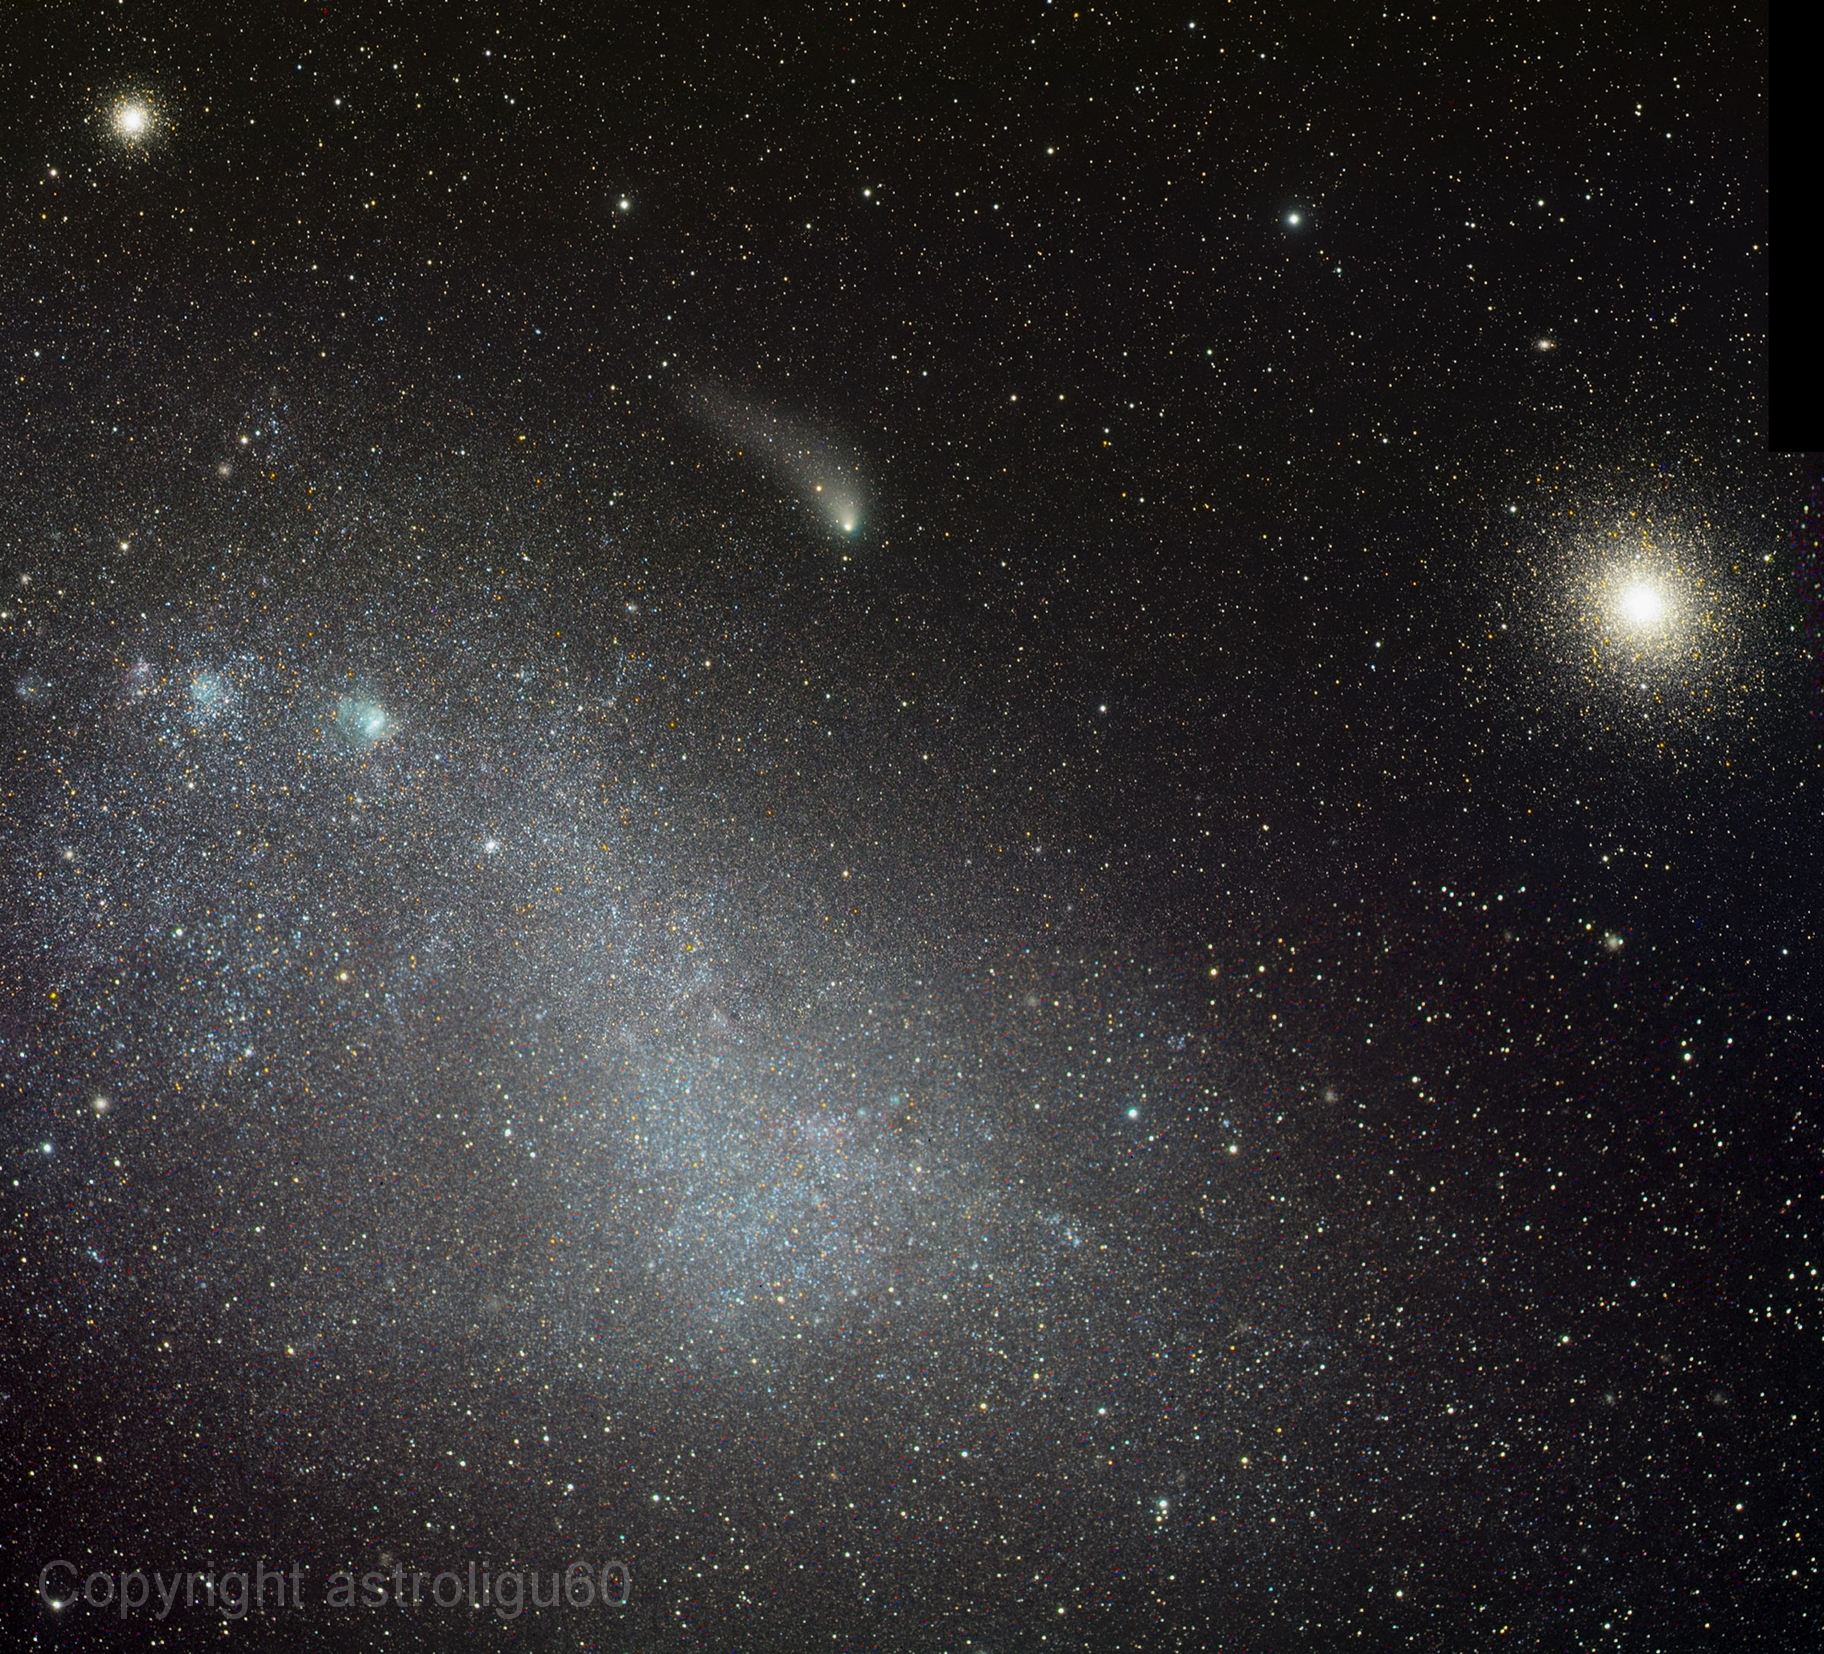 Cloud, Clusters and Comet Siding Spring